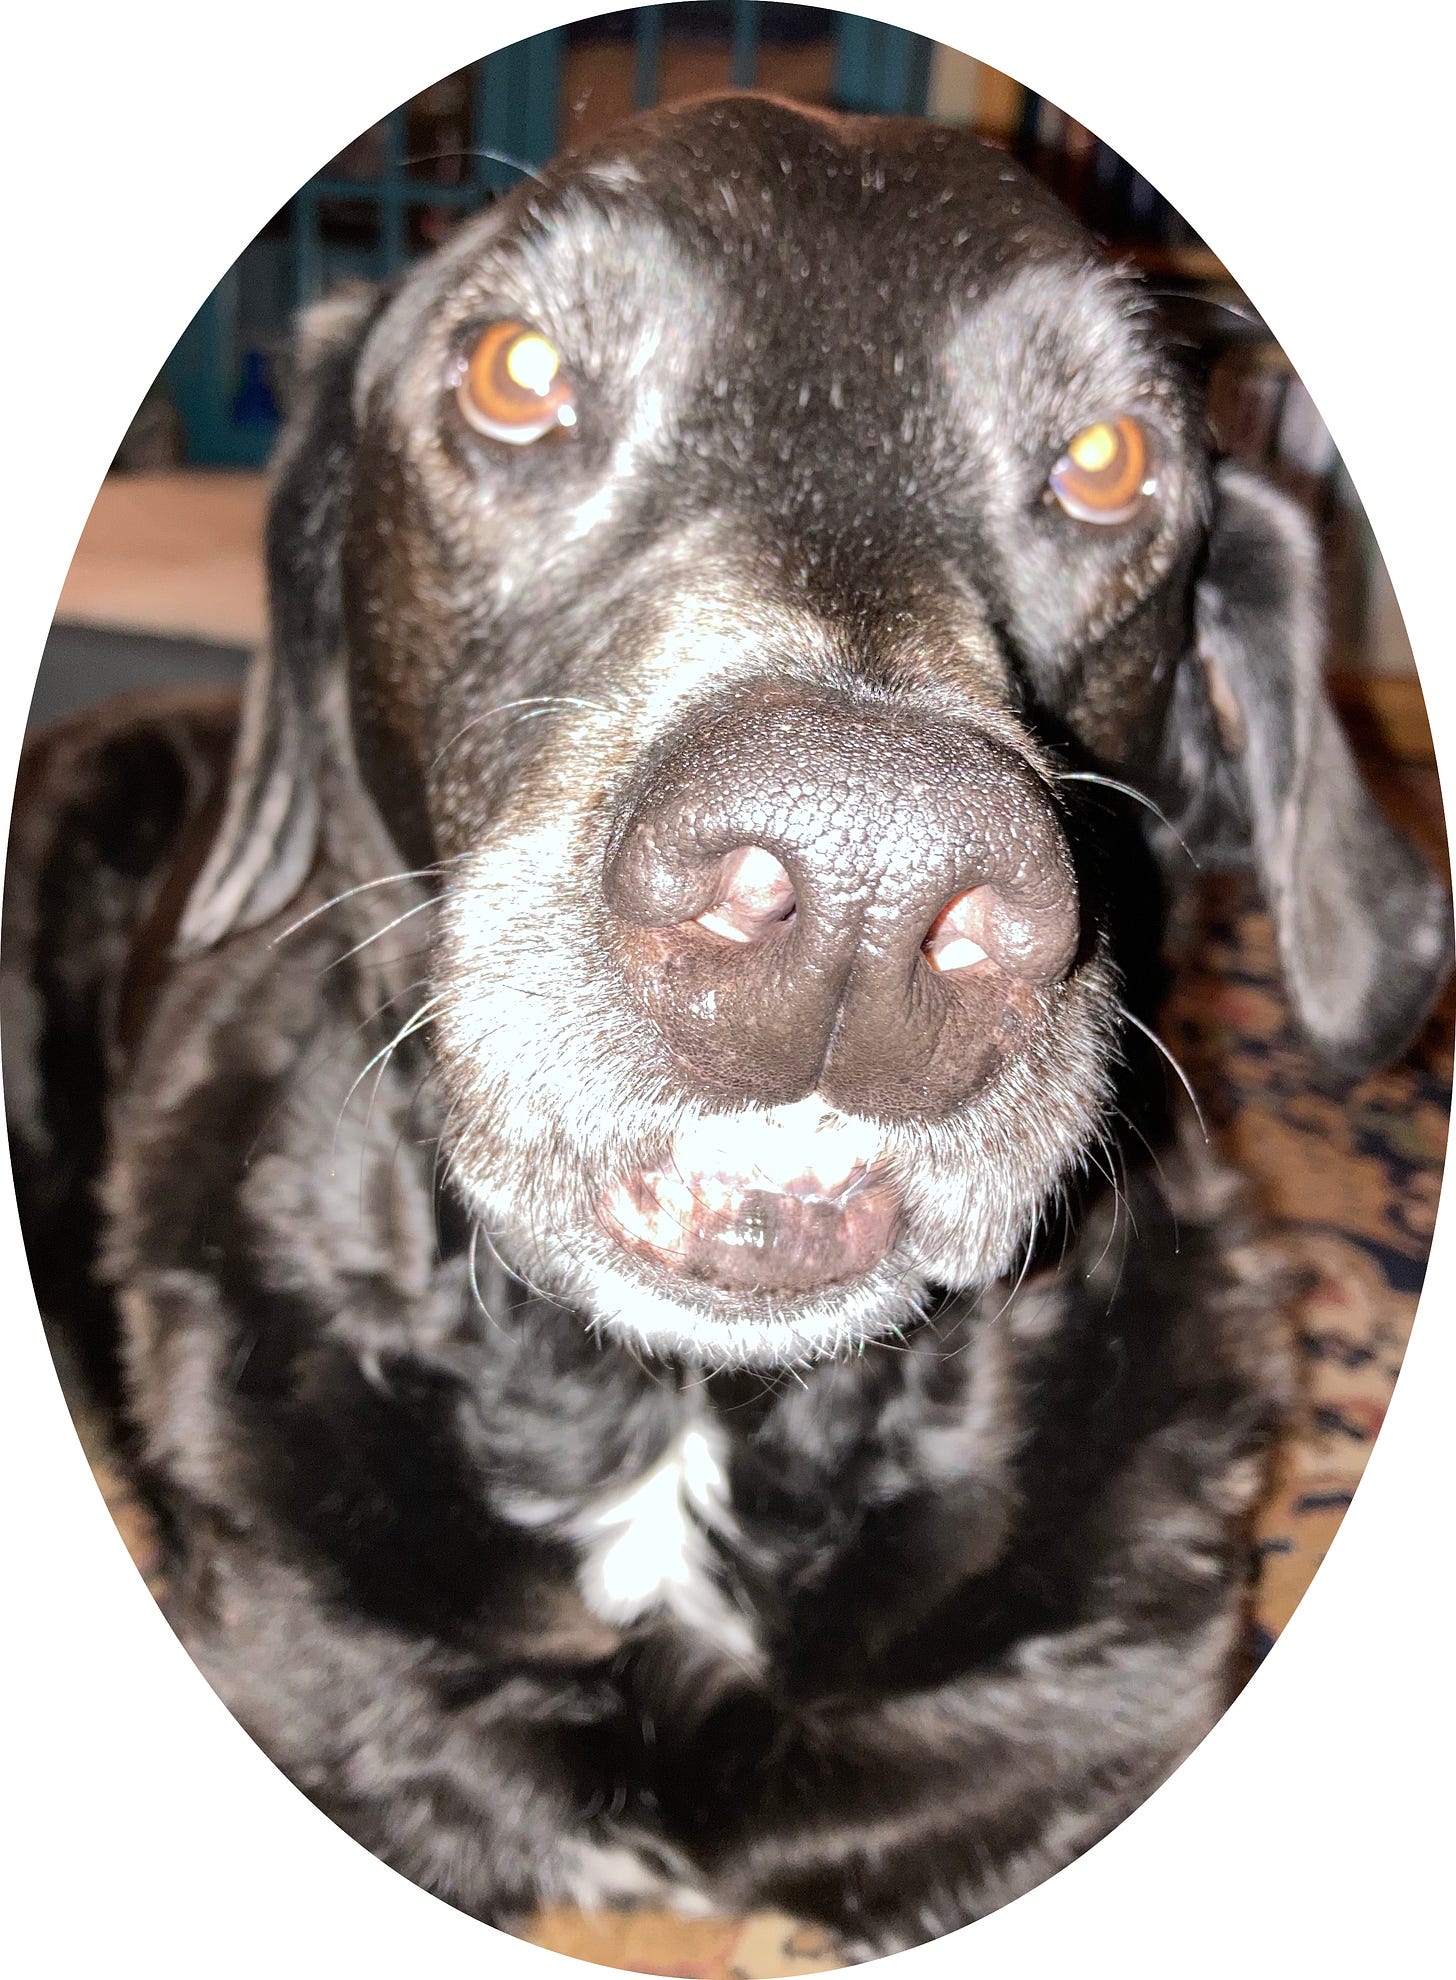 Ande, the black lab, still poses looking directly at the camera but the flash and her nibble teeth do not do her justice.